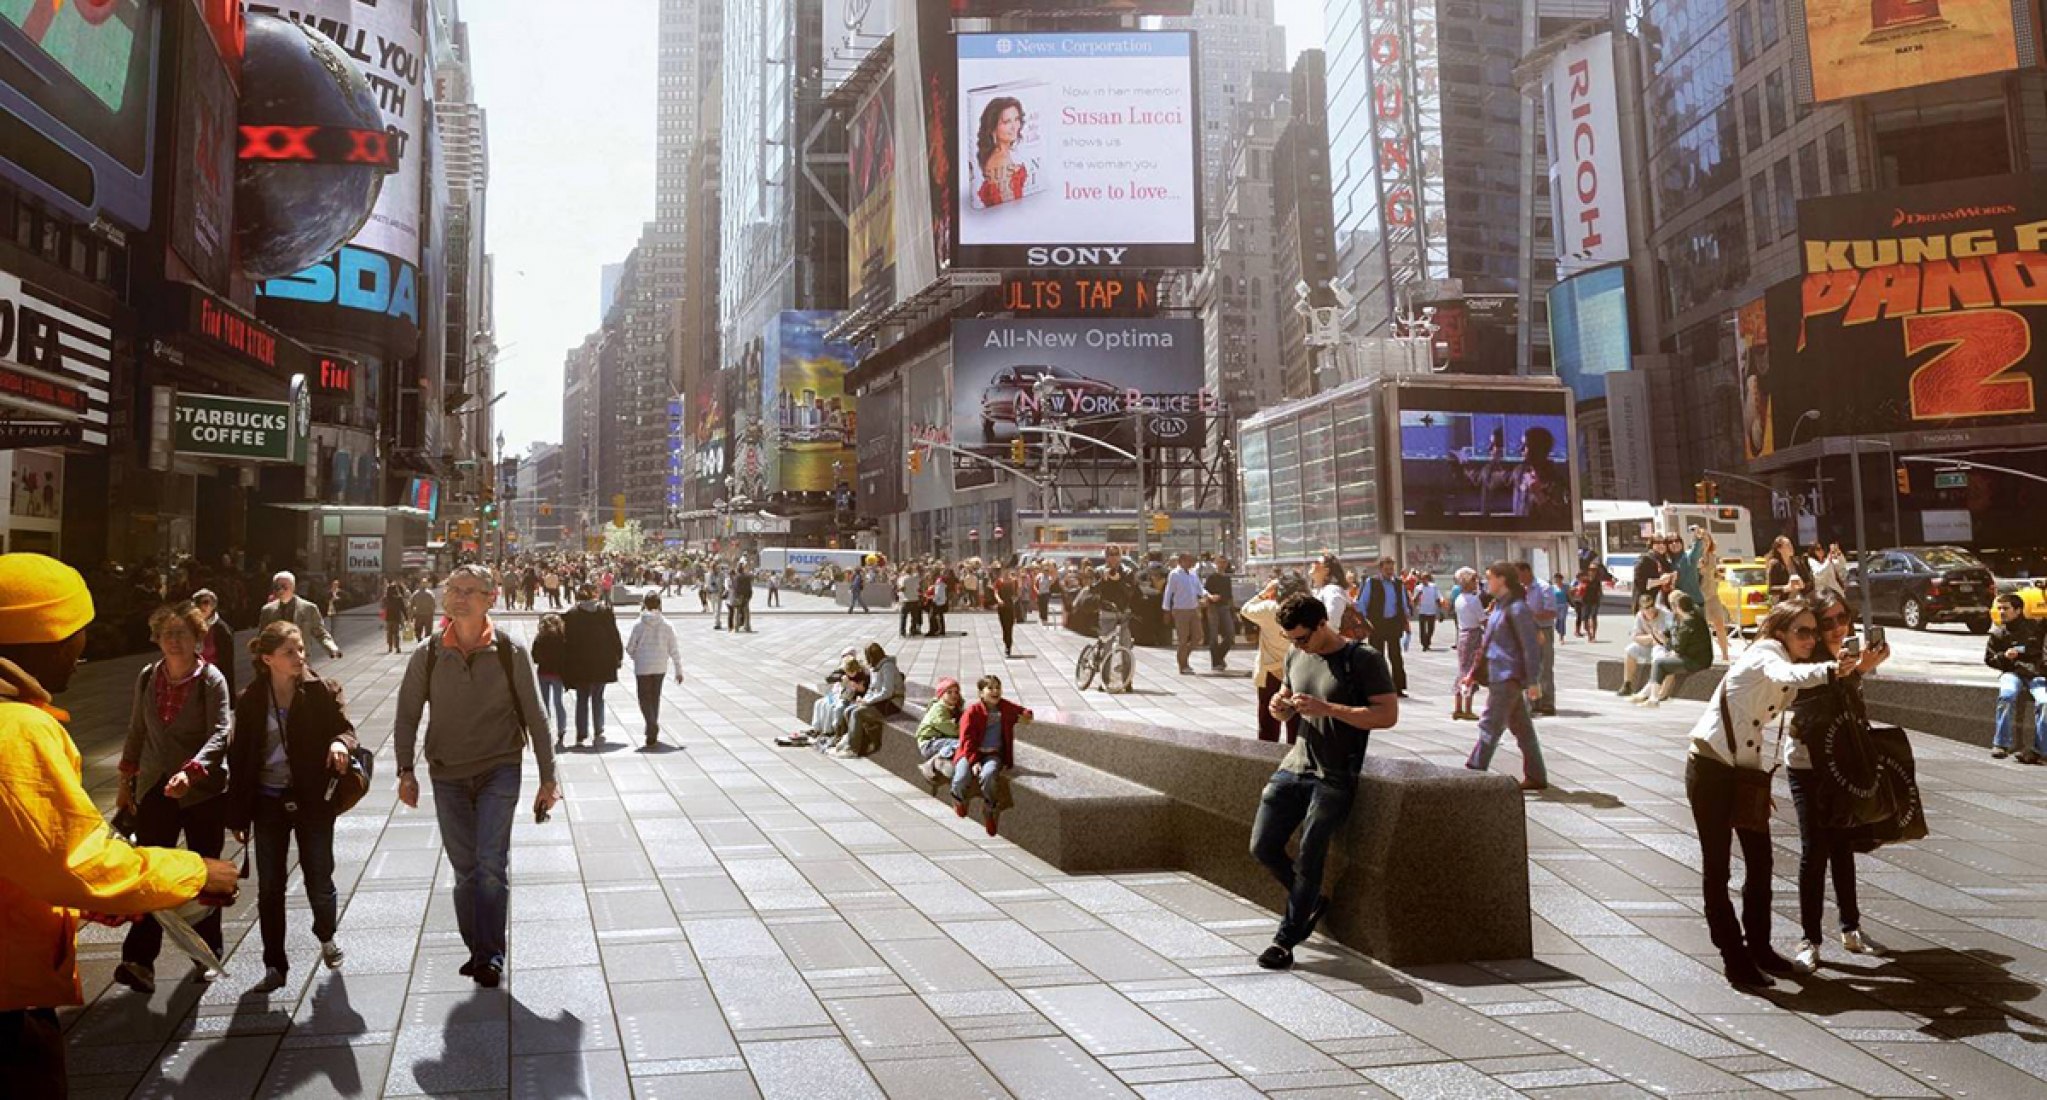 Times Square Reconstruction by Snohetta. Rendering by Snohetta and MIR.